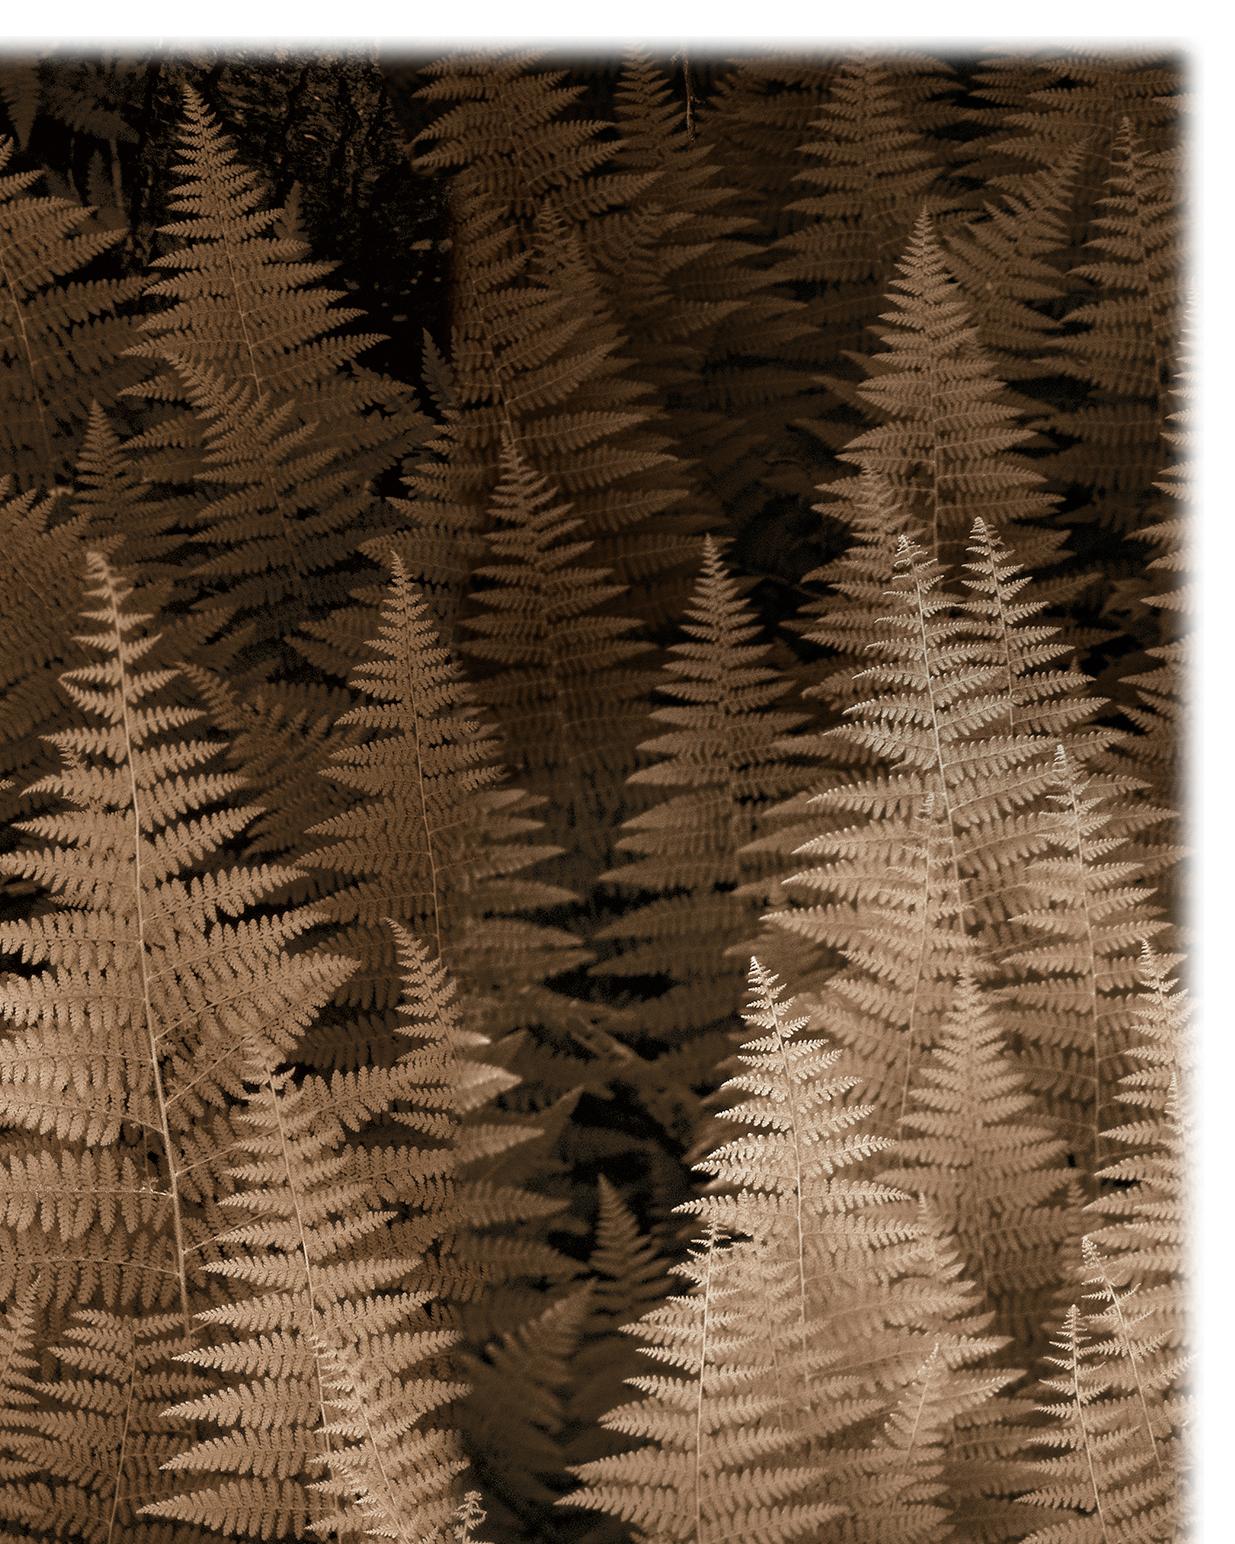 Ferns No. 2 (Sepia-Tone Botanical Still-Life Photograph on Watercolor Paper) For Sale 4